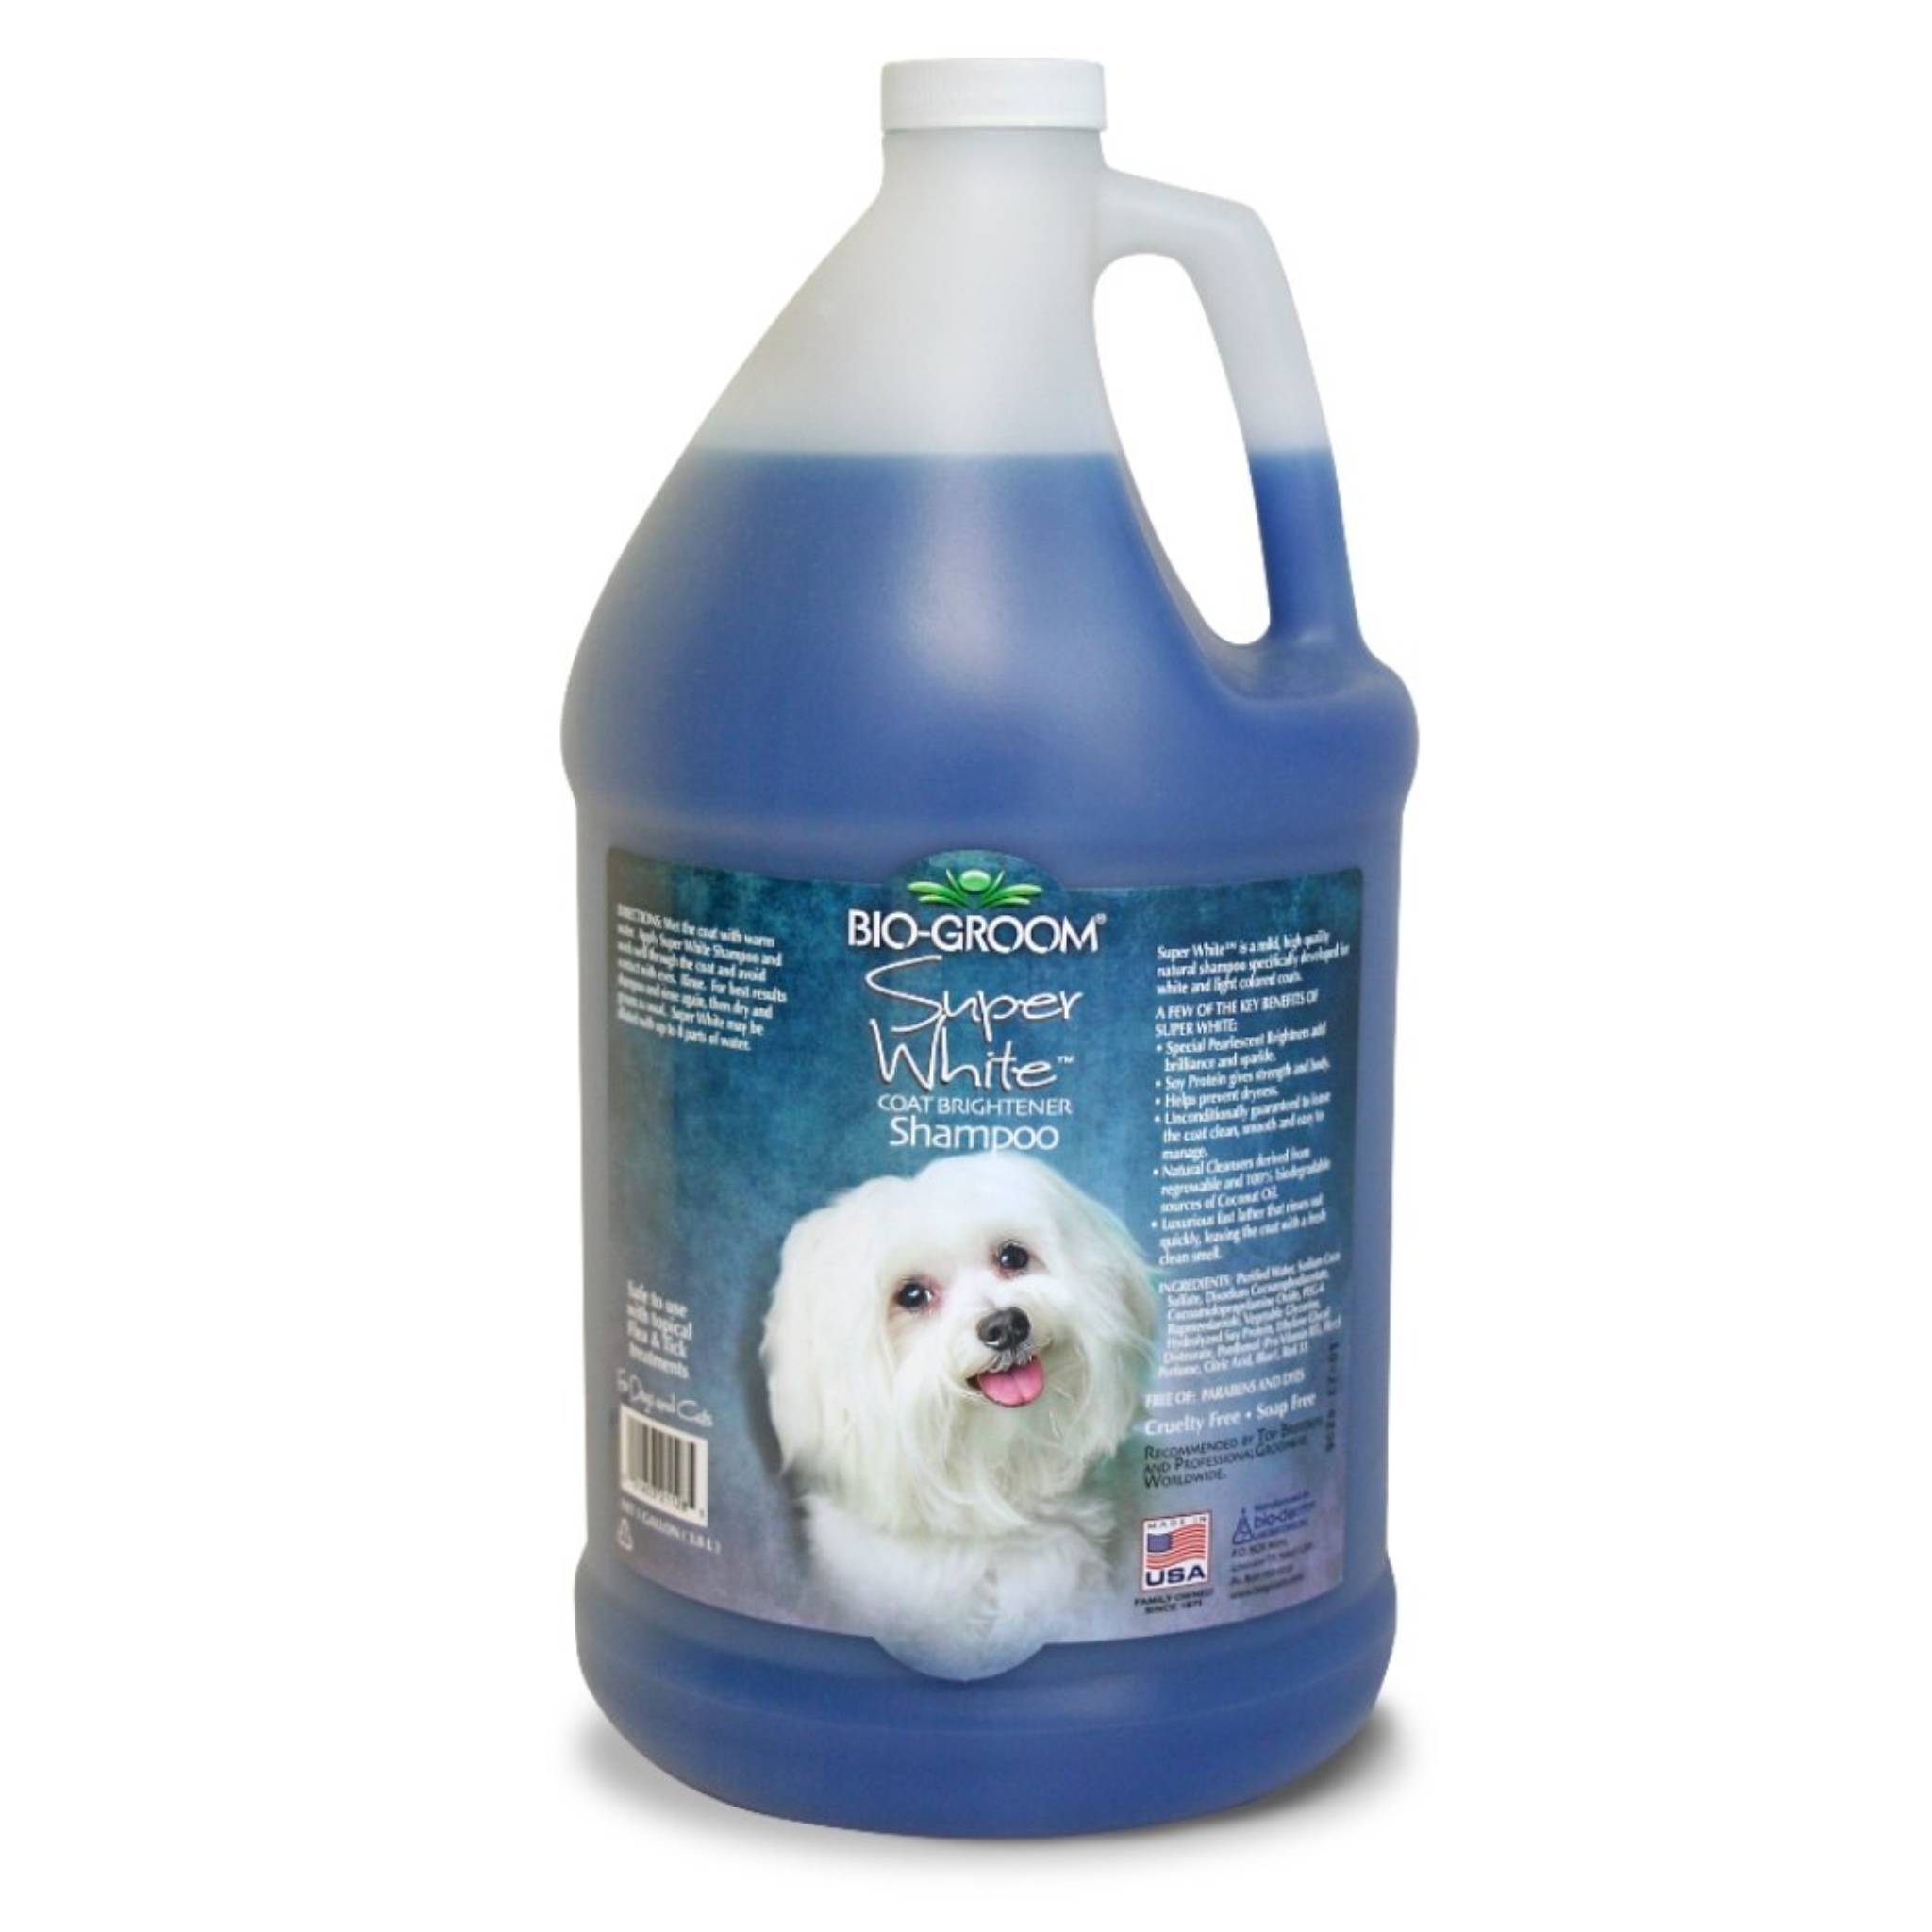 Biogroom Super White Coat Brightener Pet Shampoo for Cats and Dogs